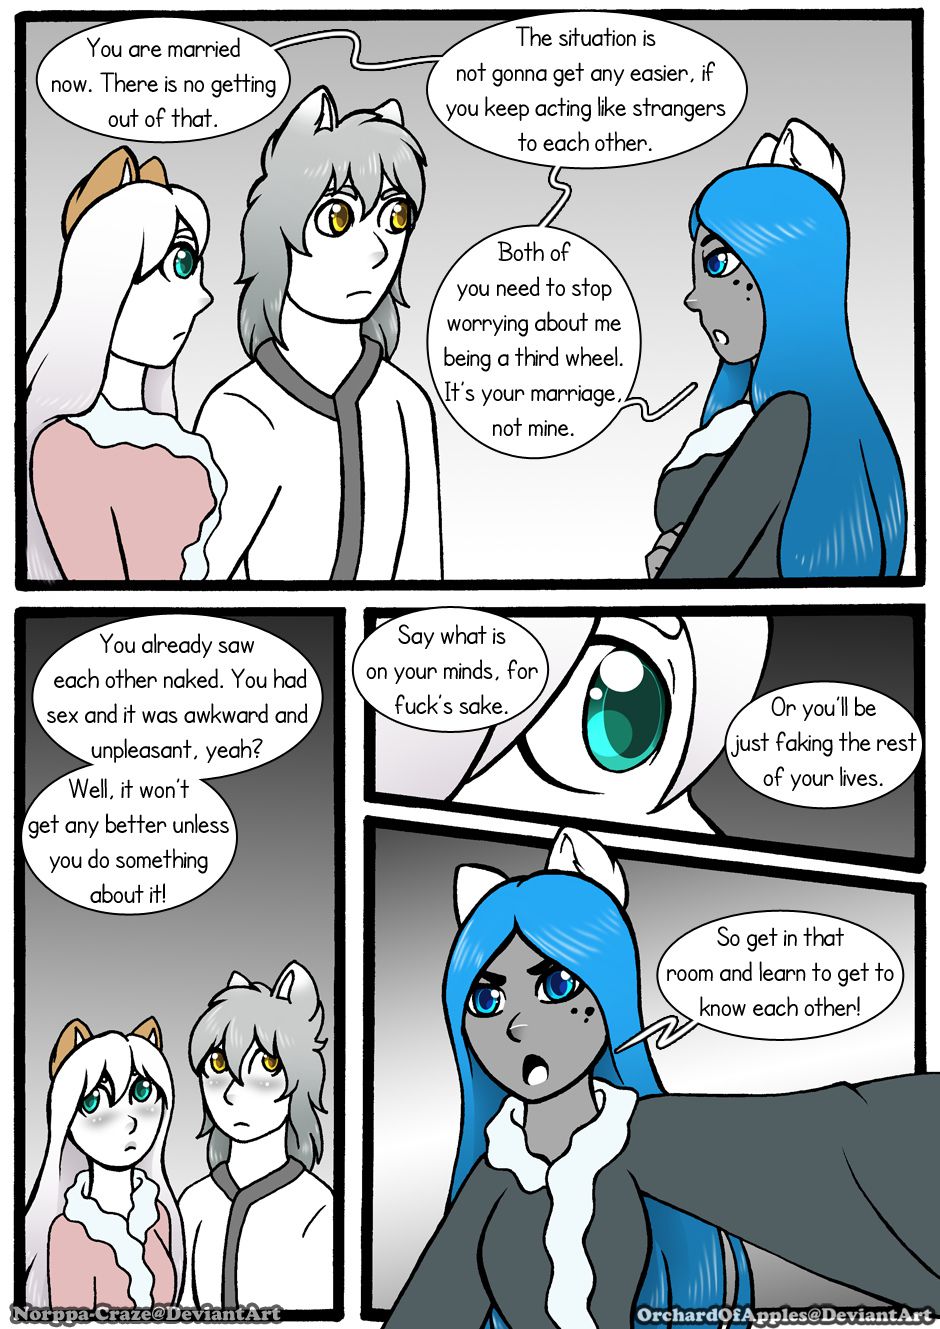 [Jeny-jen94] Between Kings and Queens [Ongoing] 267